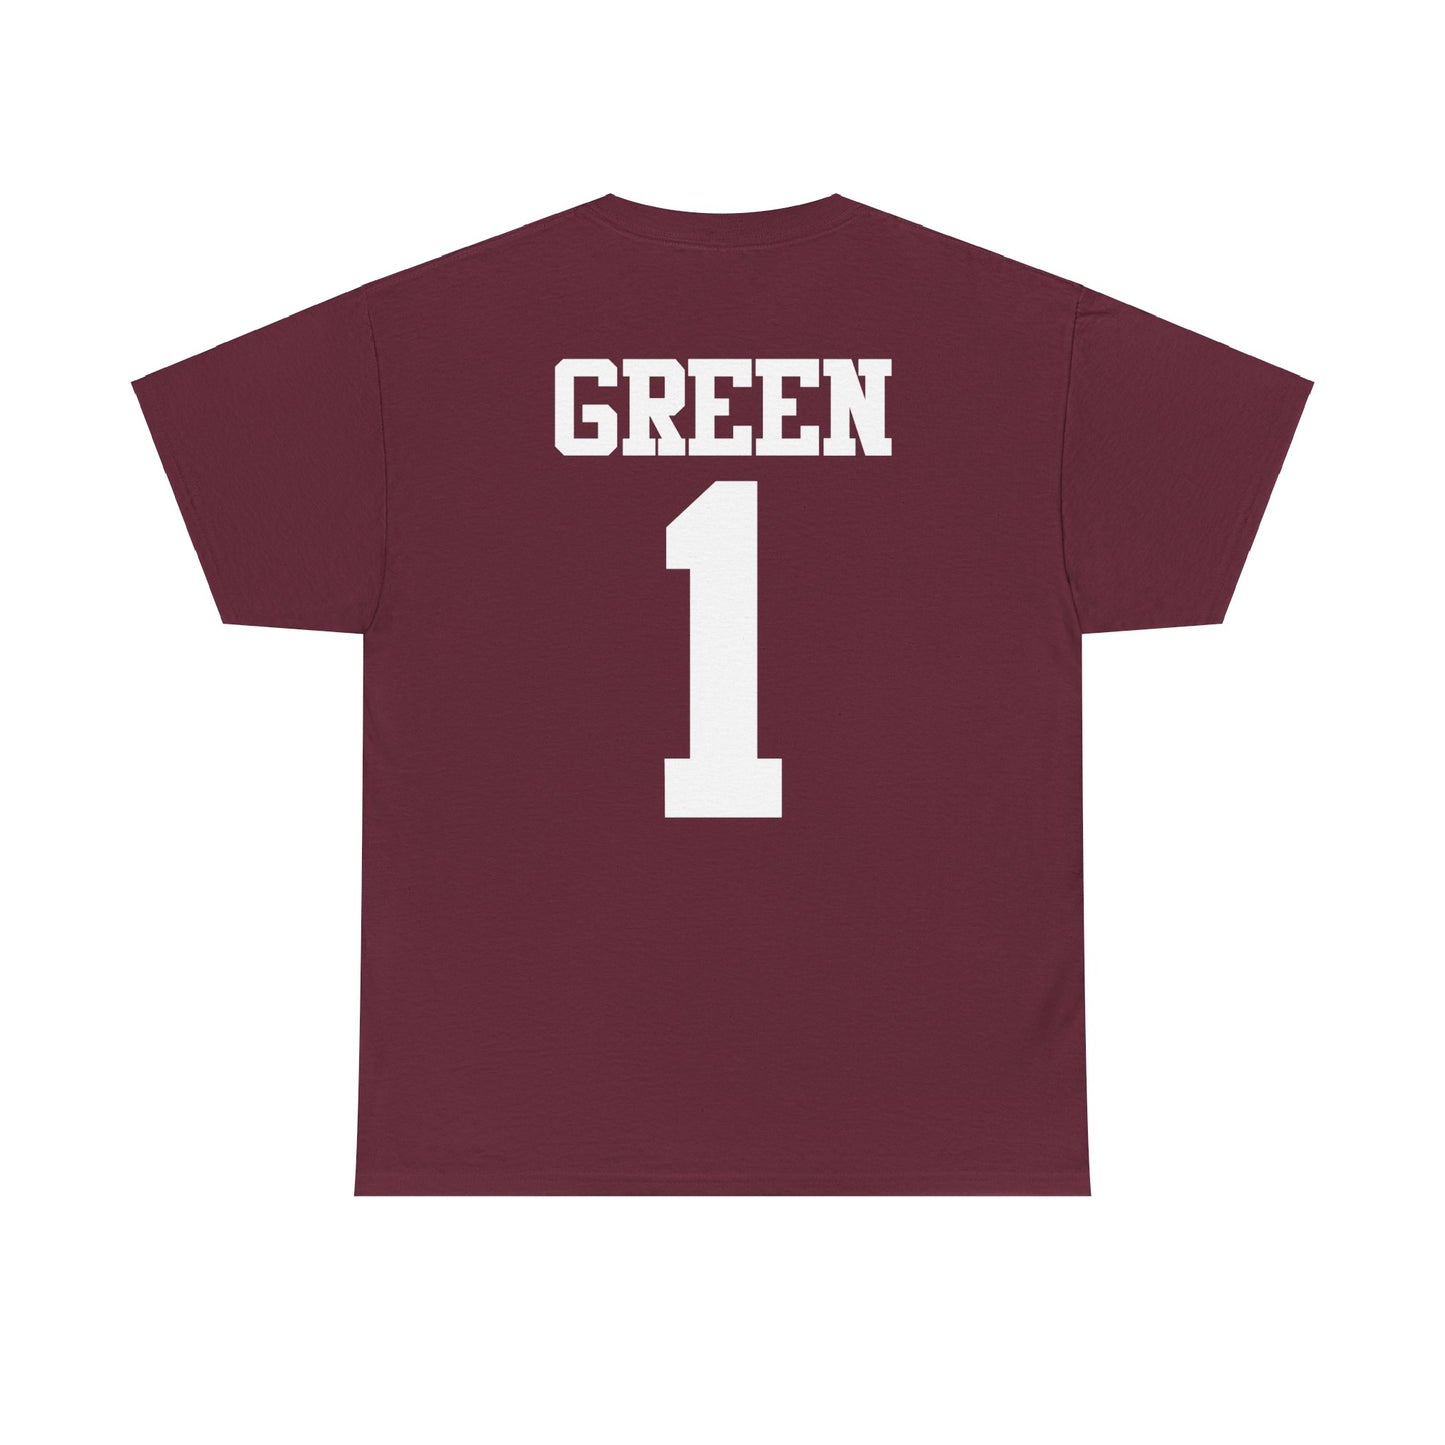 Myla Green: GameDay With Name & Number Tee